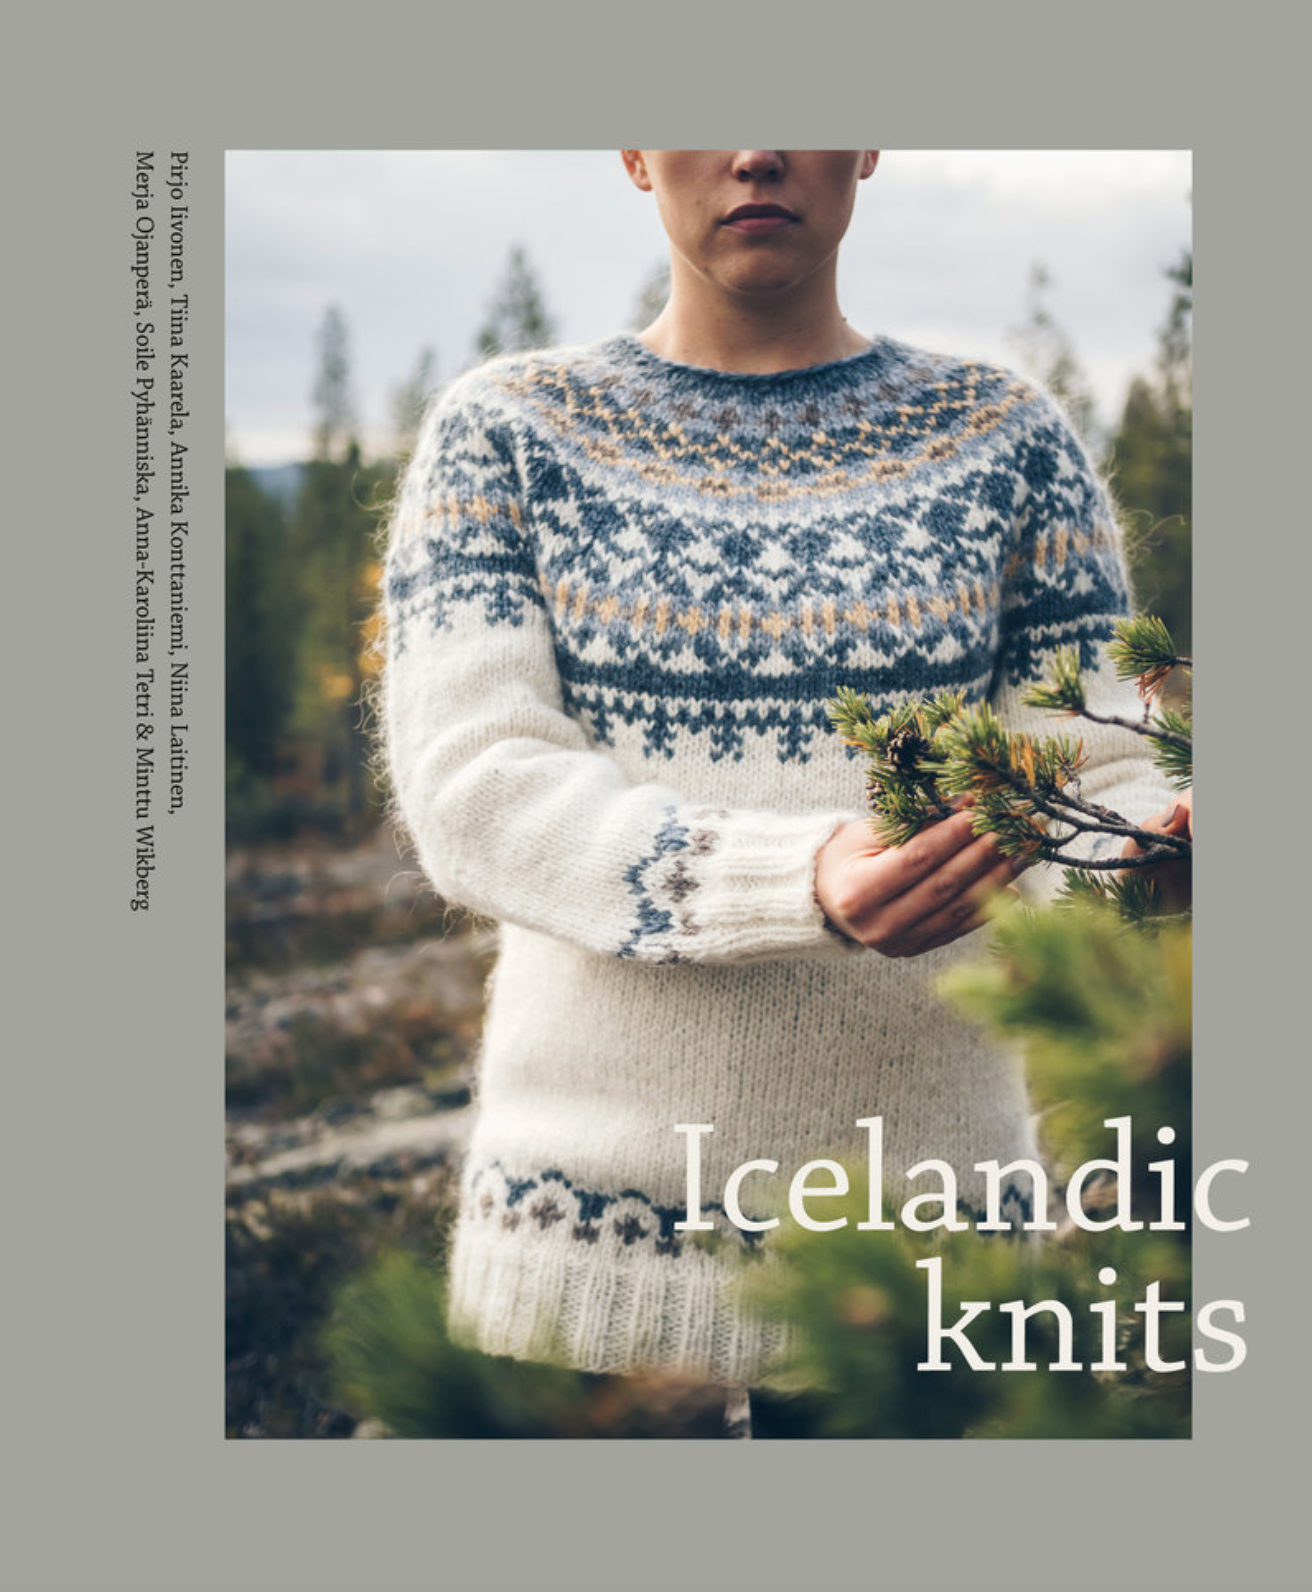 Load image into Gallery viewer, Icelandic Knits
